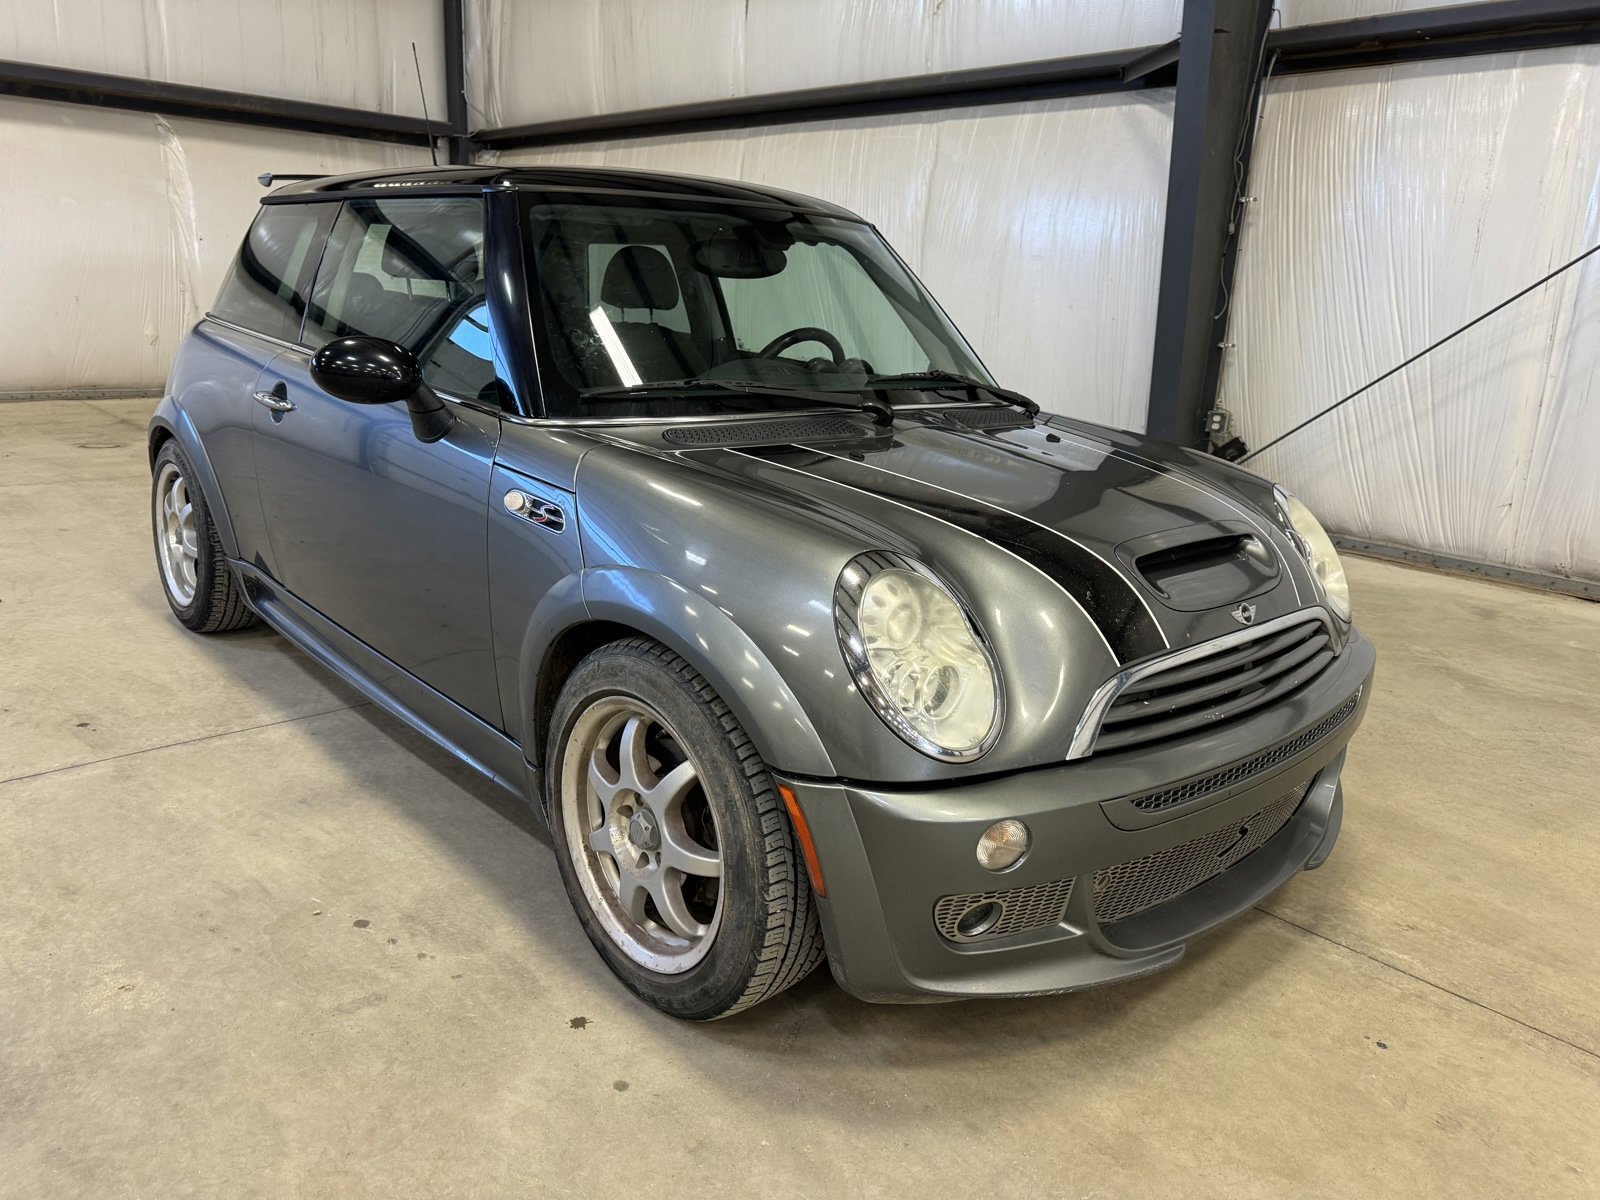 2006 MINI Cooper Hardtop S *** SELLING AS TRADED***